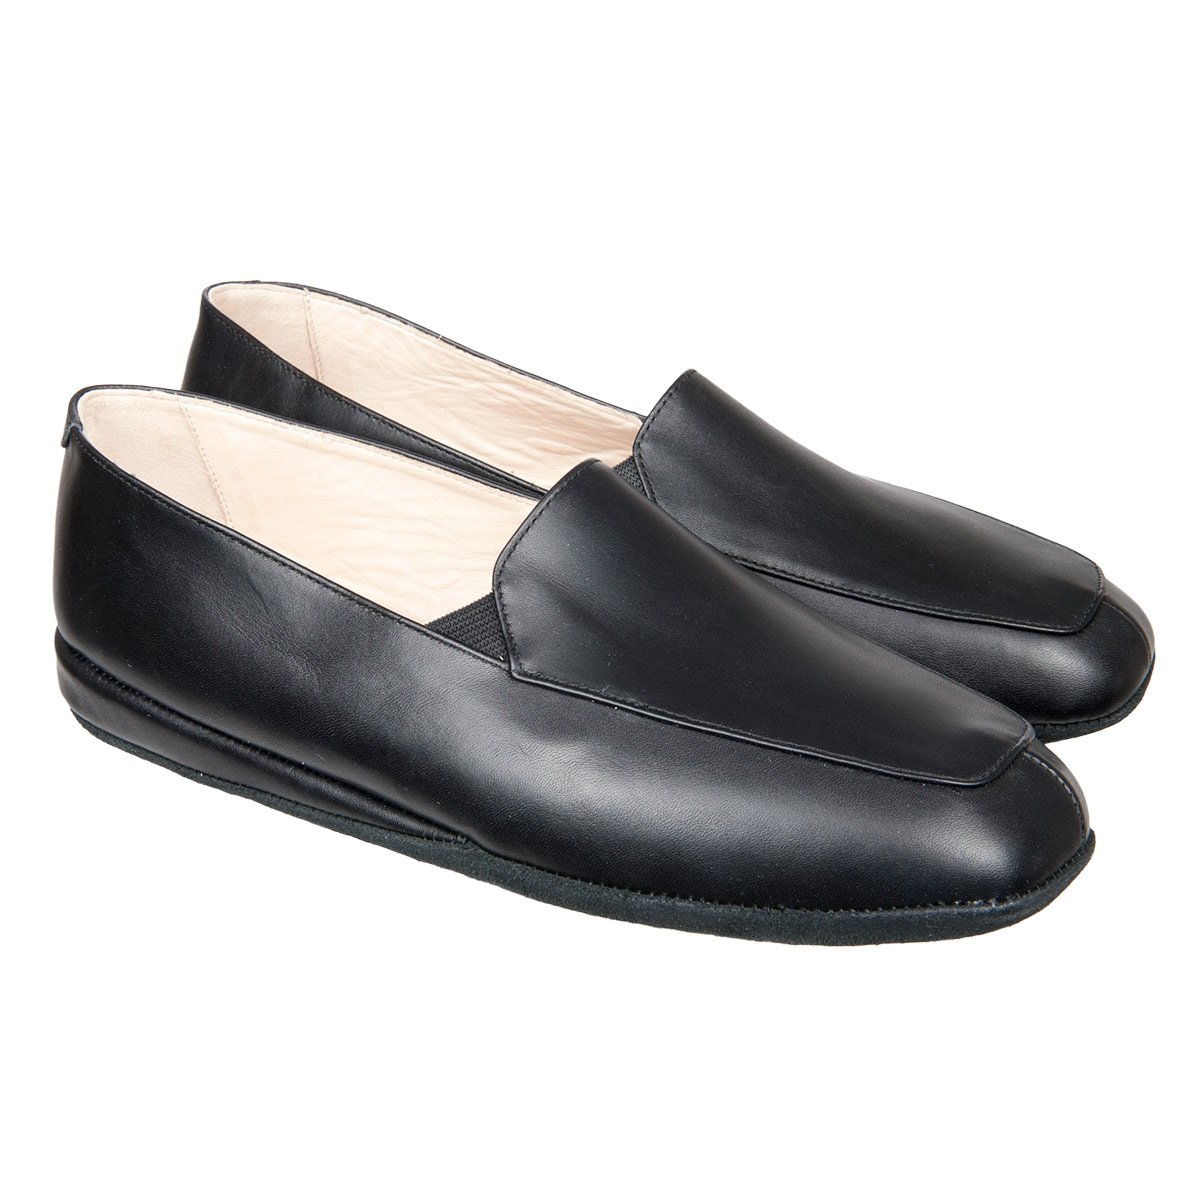 Vred champion forsvinde Leather slippers handmade in Italy in high-quality and robust for men